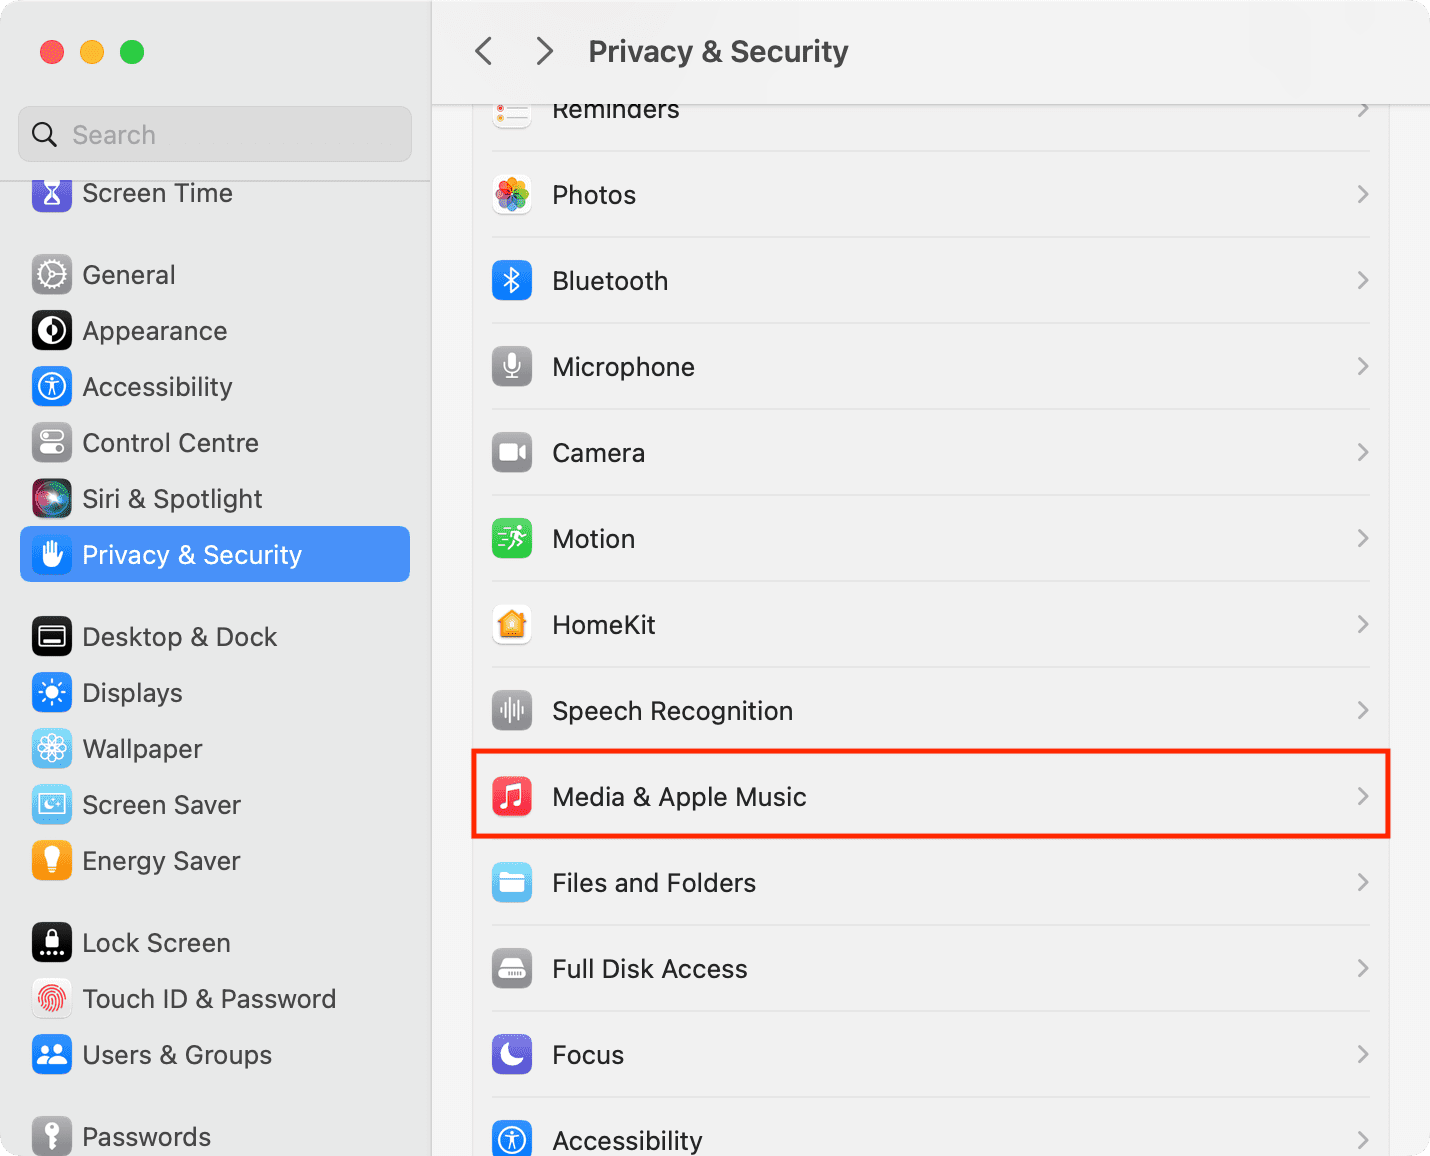 Media and Apple Music in Privacy settings on Mac